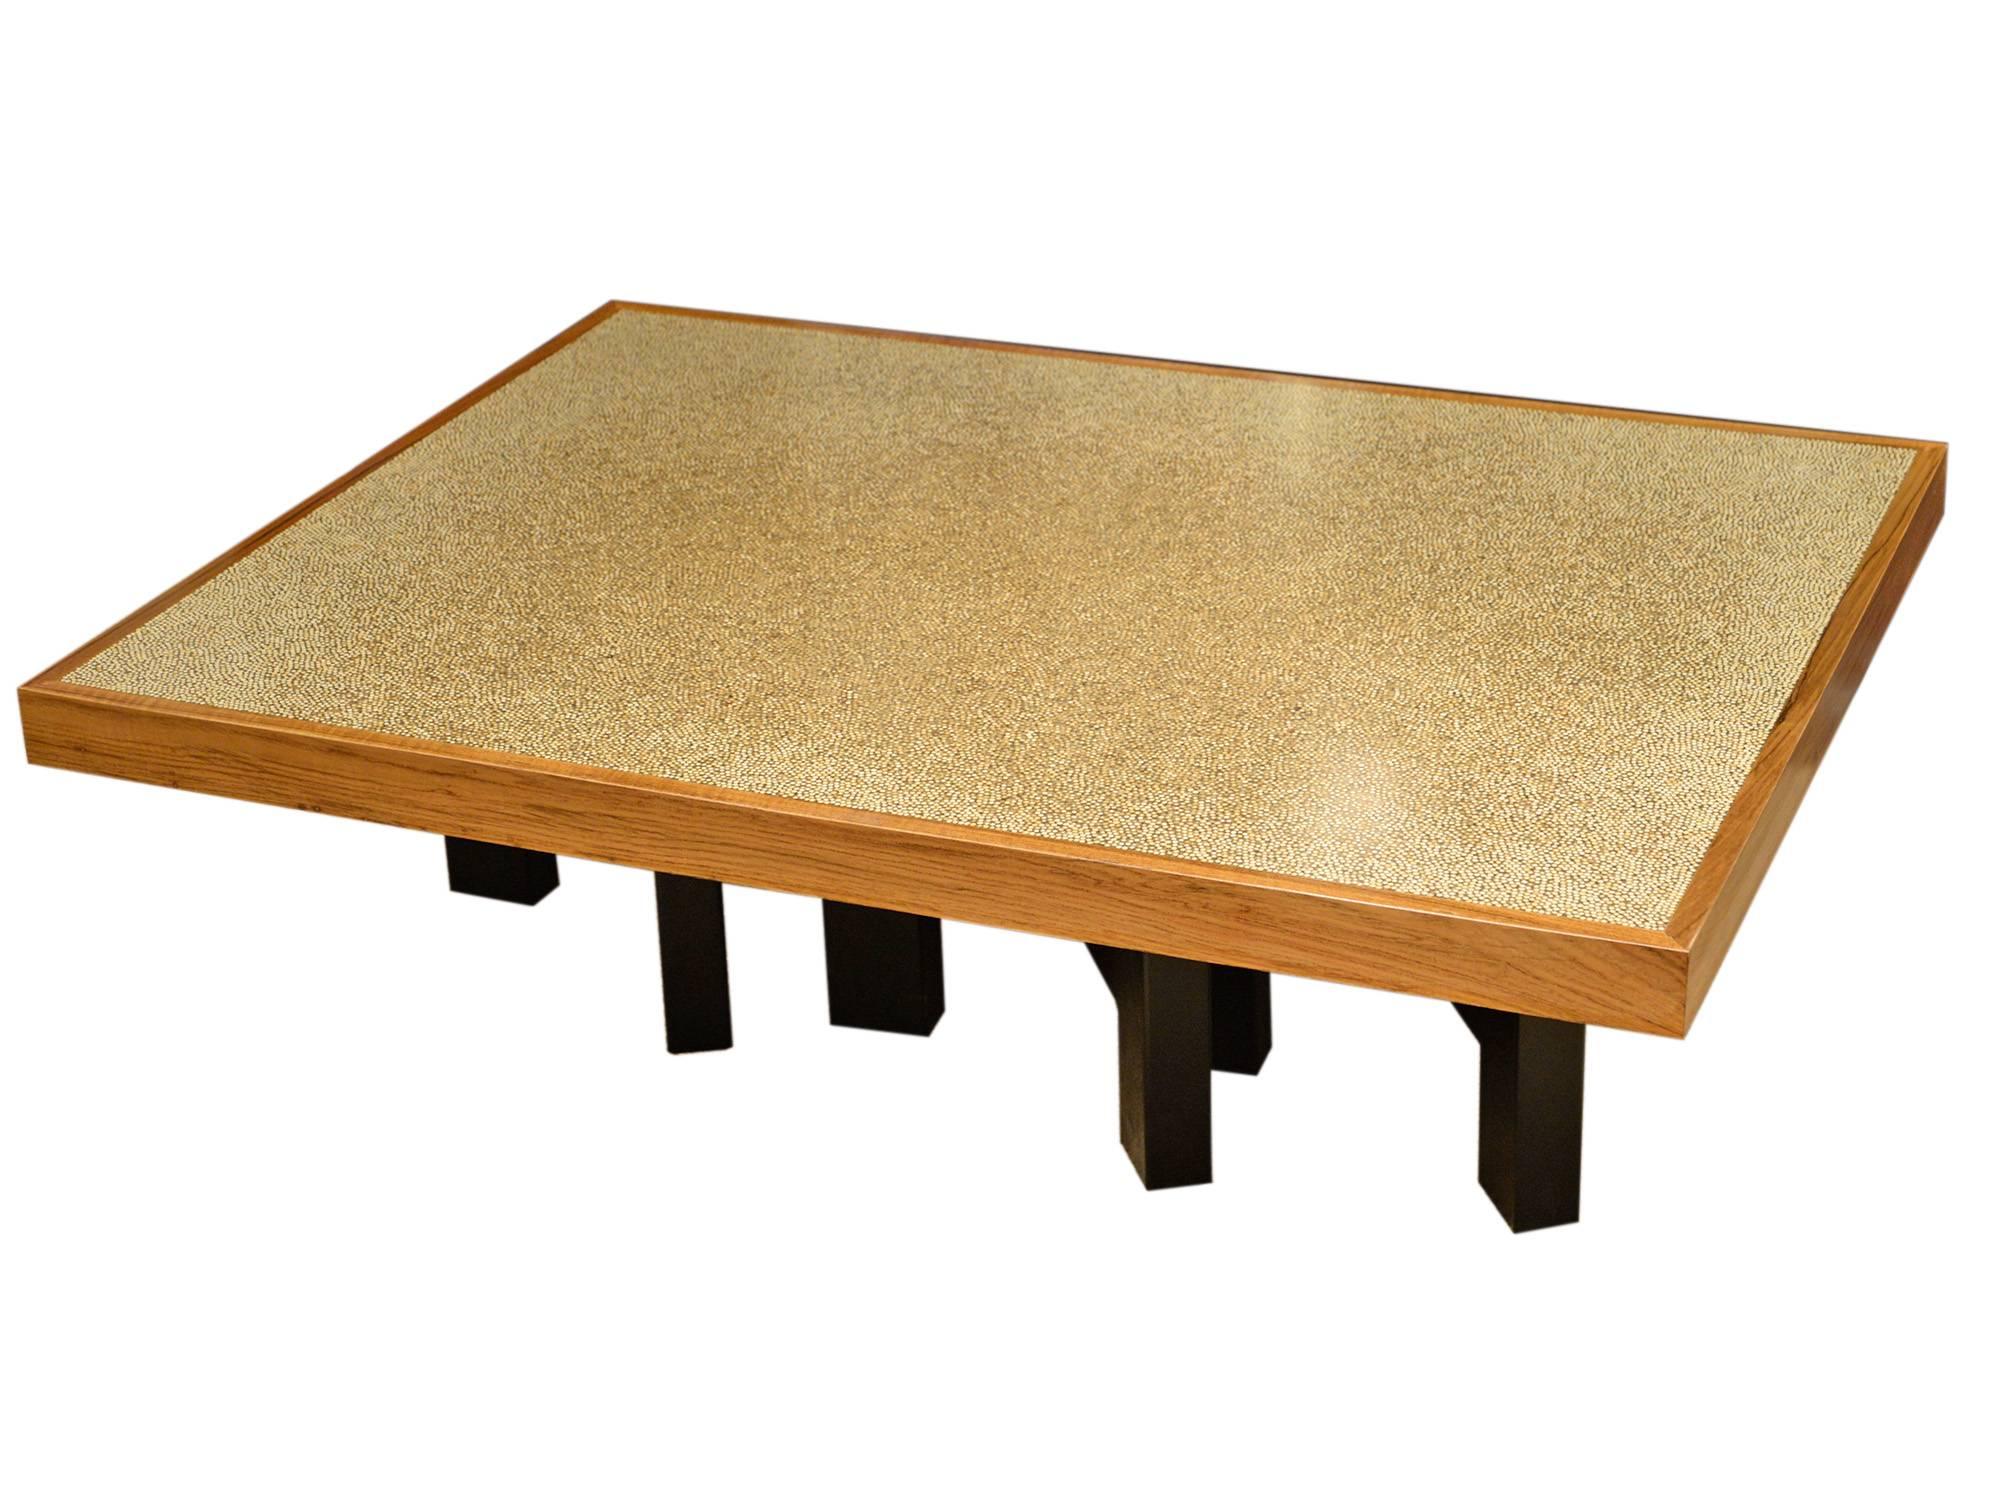 Ado Chale
Coffee table
Peppercorn, wood, resin, metal (feet)
Belgium, Circa 1970
Unique piece
Signed 